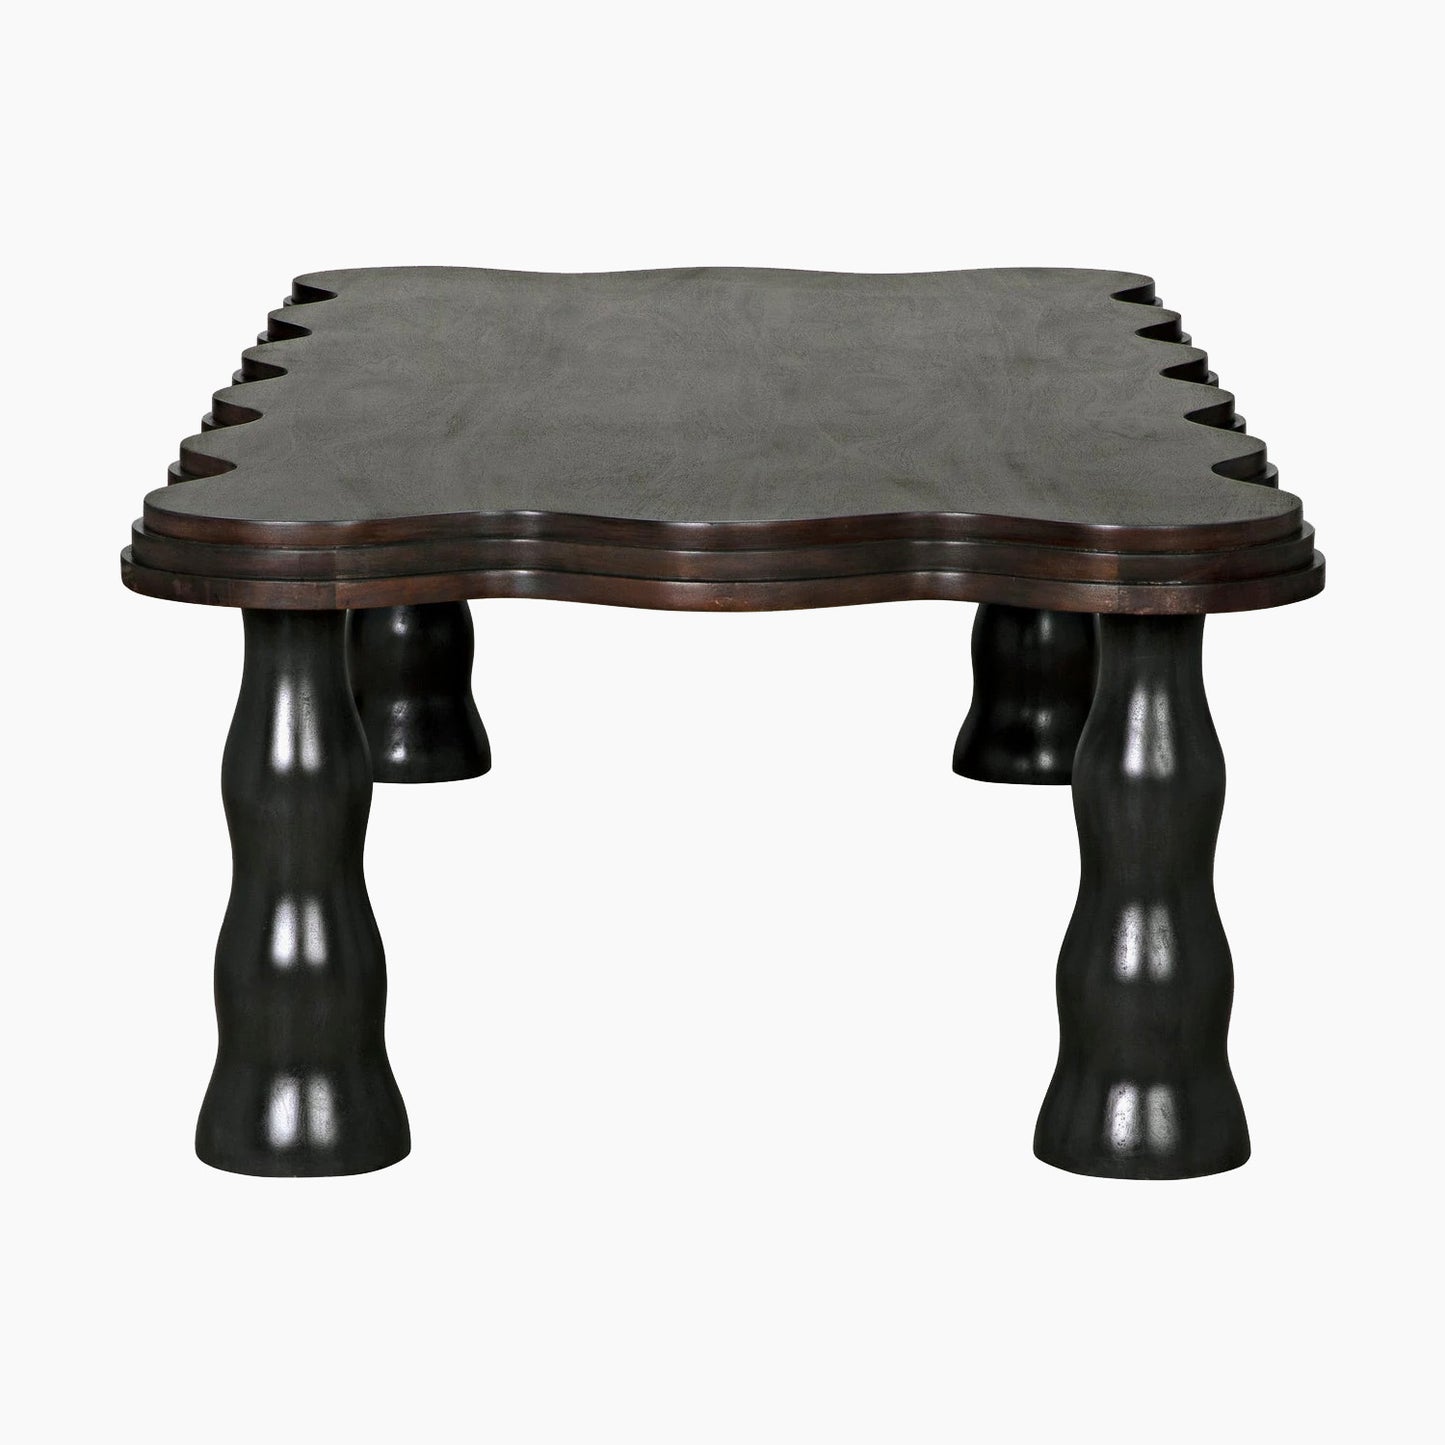 Ayla Coffee Table, Pale